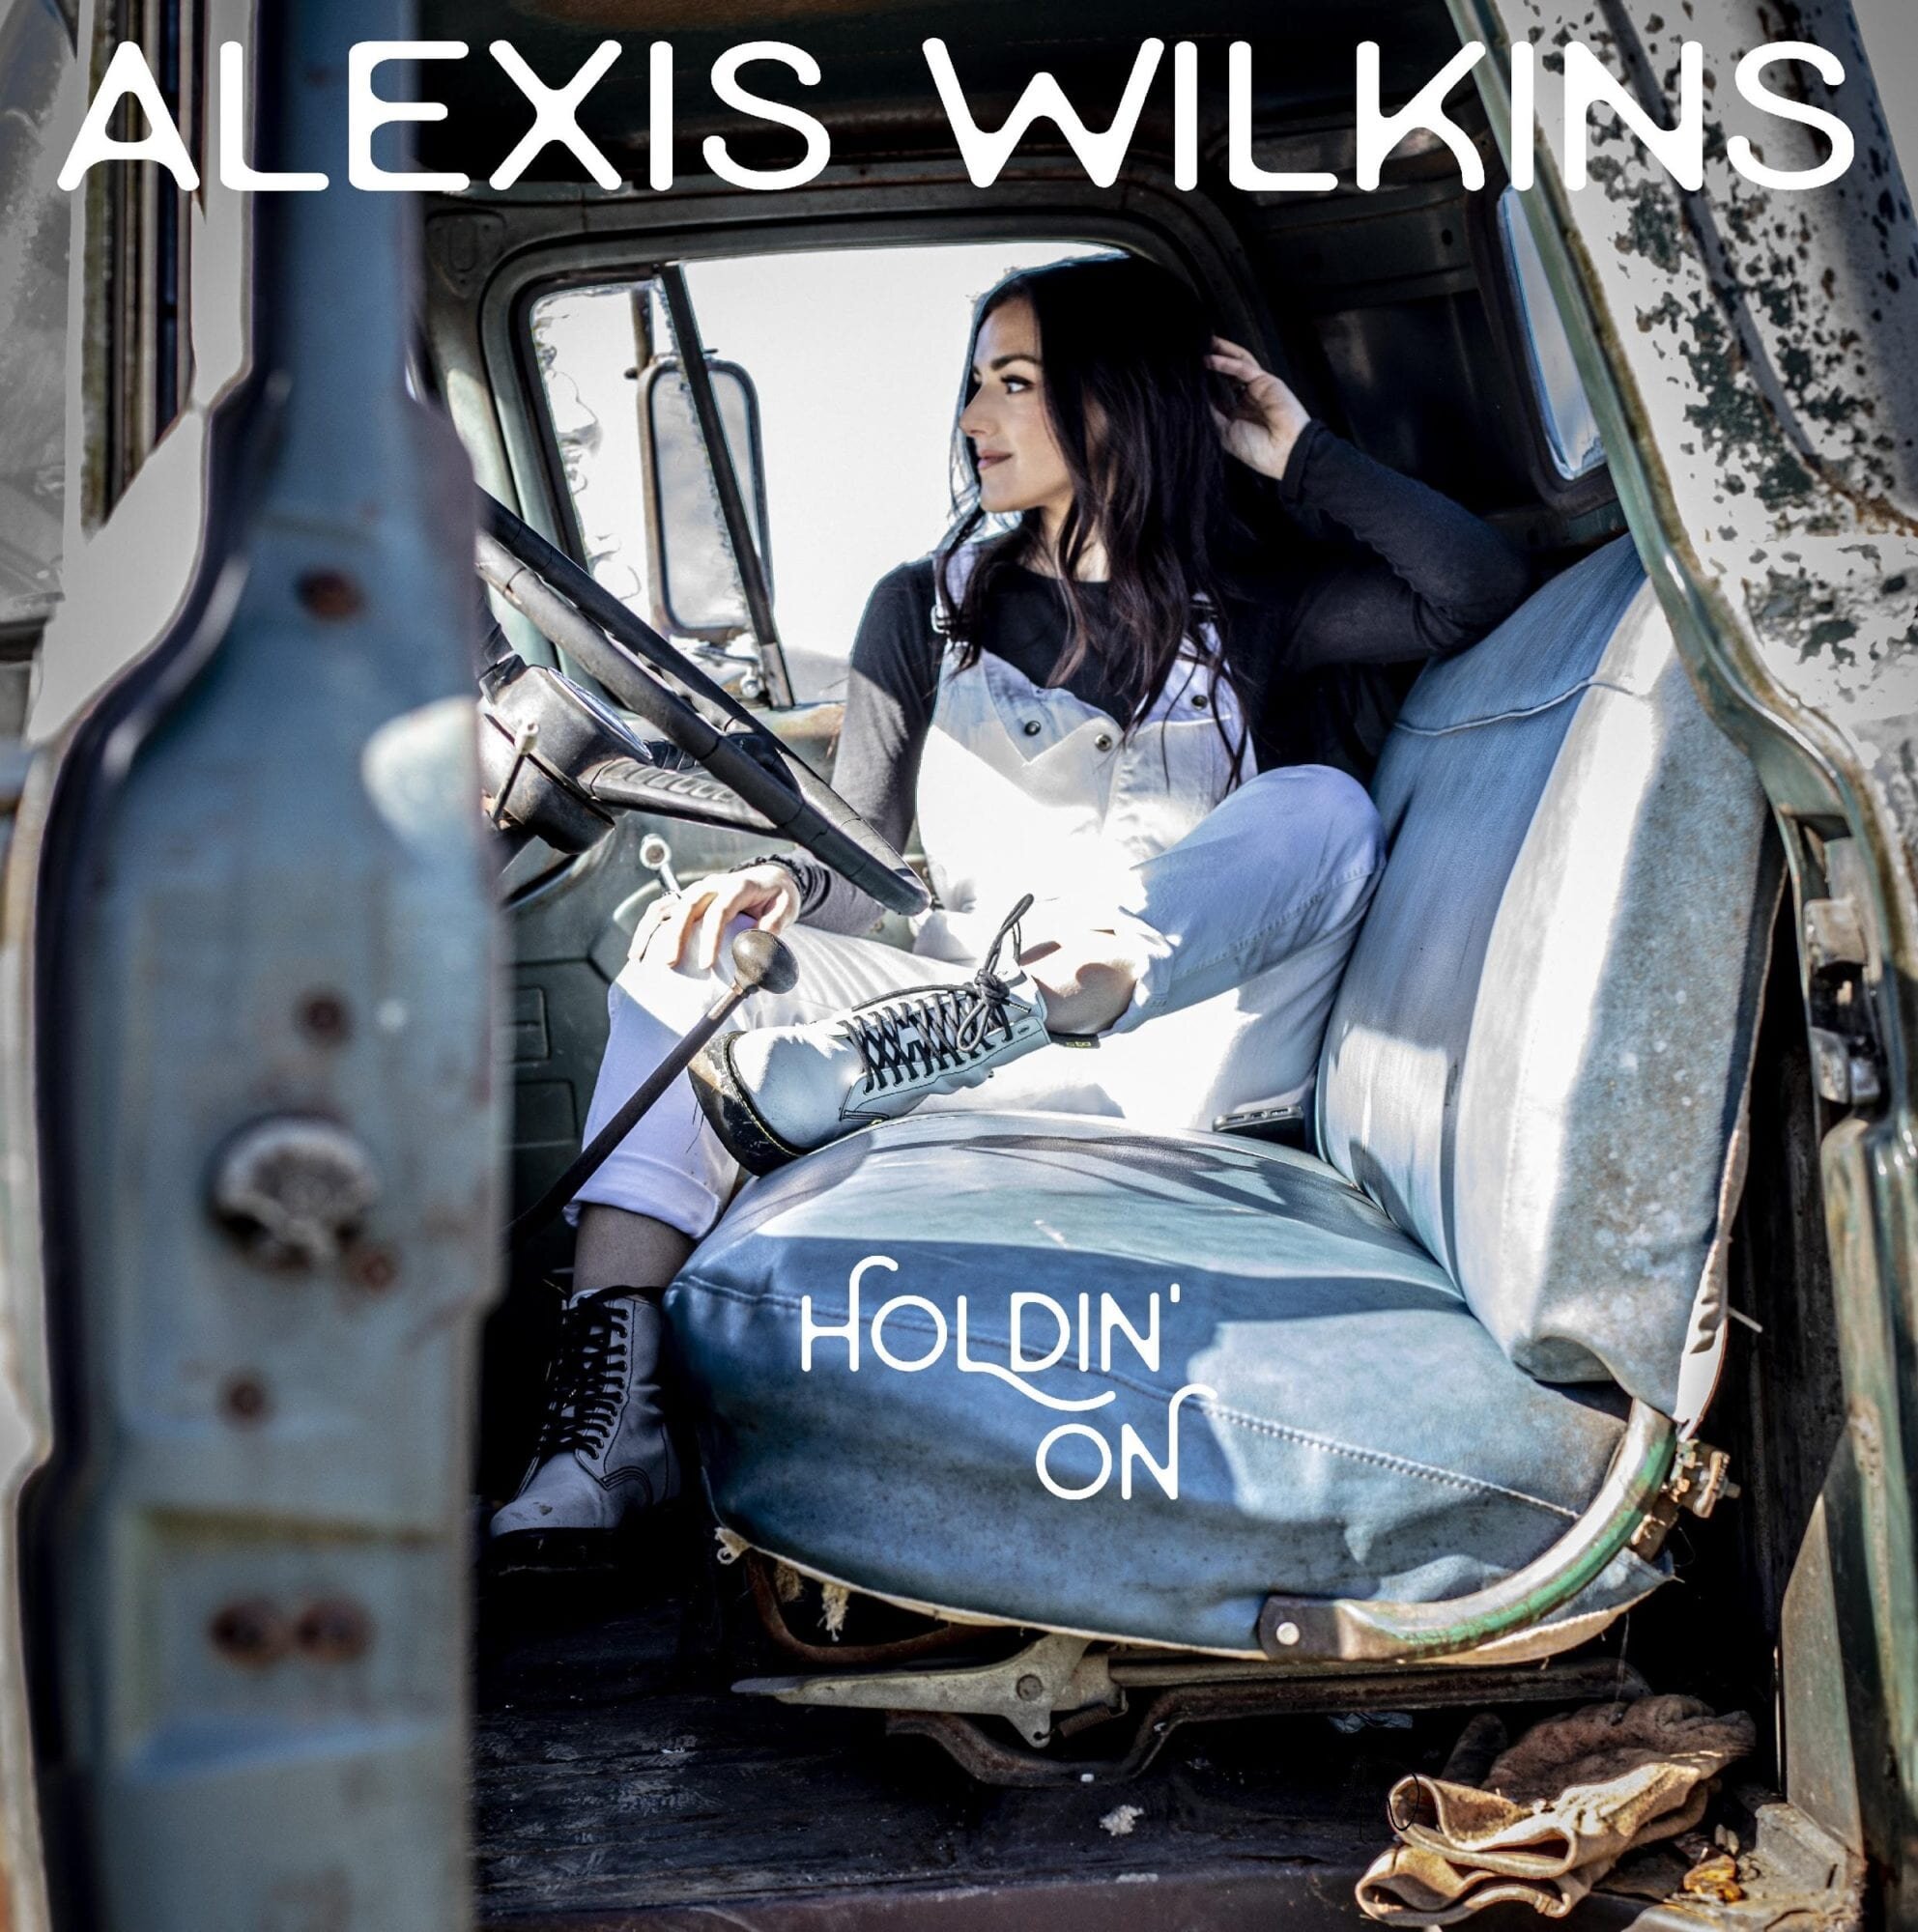 <b>Alexis Wilkins</b></br>Holdin' On</br><i><small>Stereo Master</small></I>